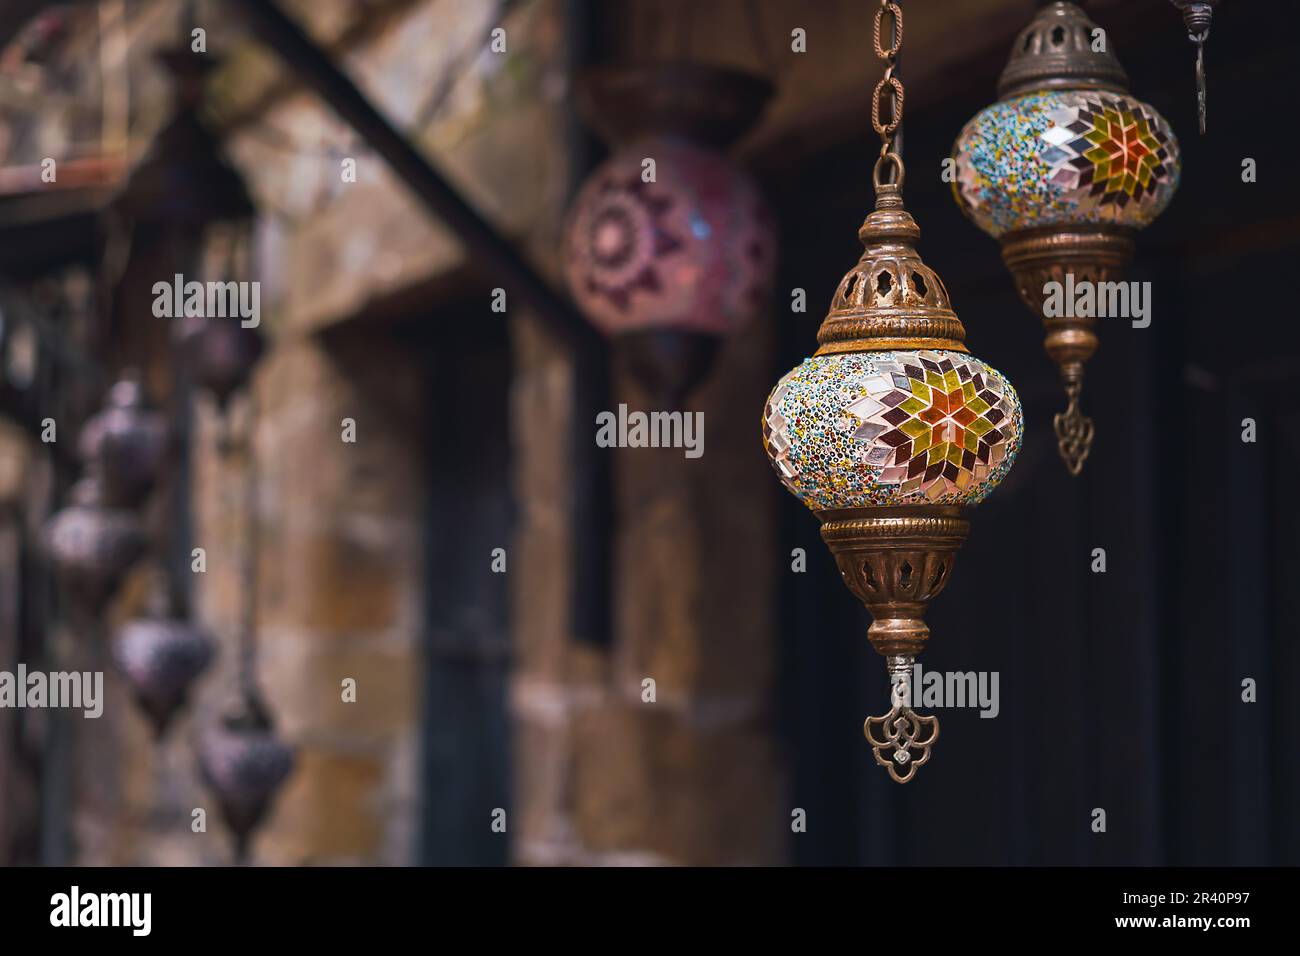 handmade traditional colorful Turkish lamps and lanterns, selective focus on lantern, blurred background, popular souvenir lanterns hanging in shop fo Stock Photo